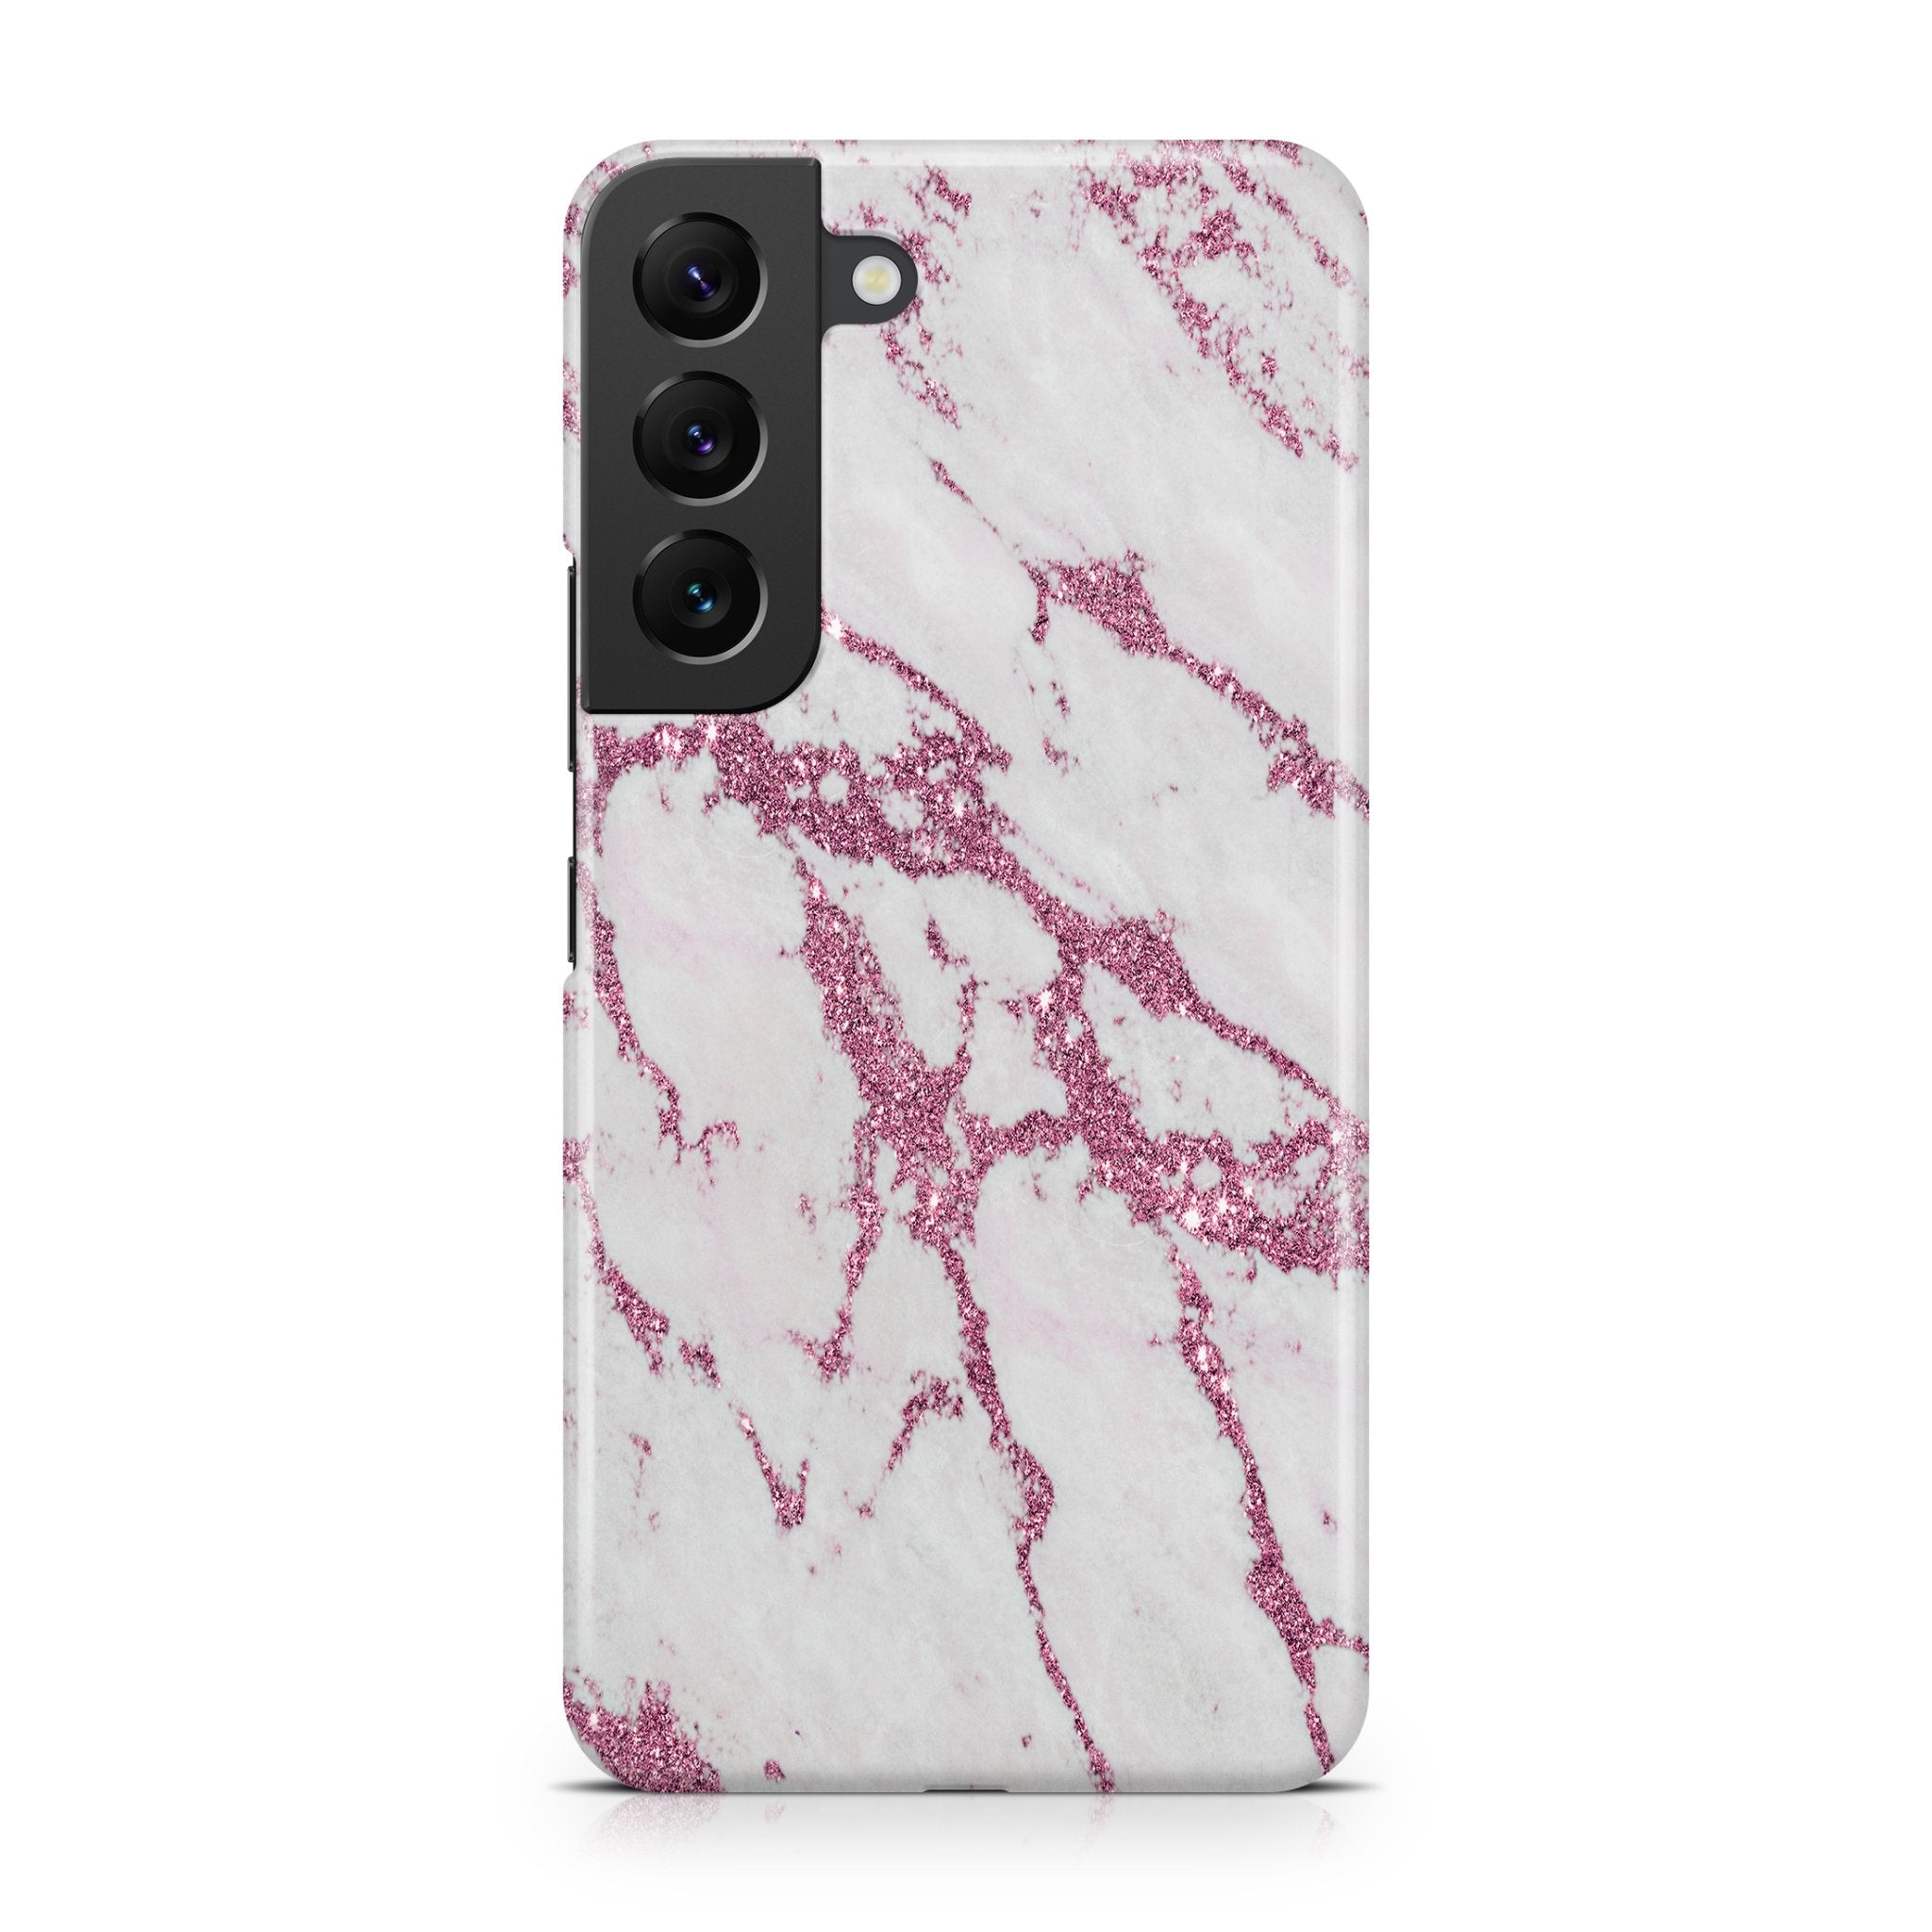 Rose Marble - Samsung phone case designs by CaseSwagger